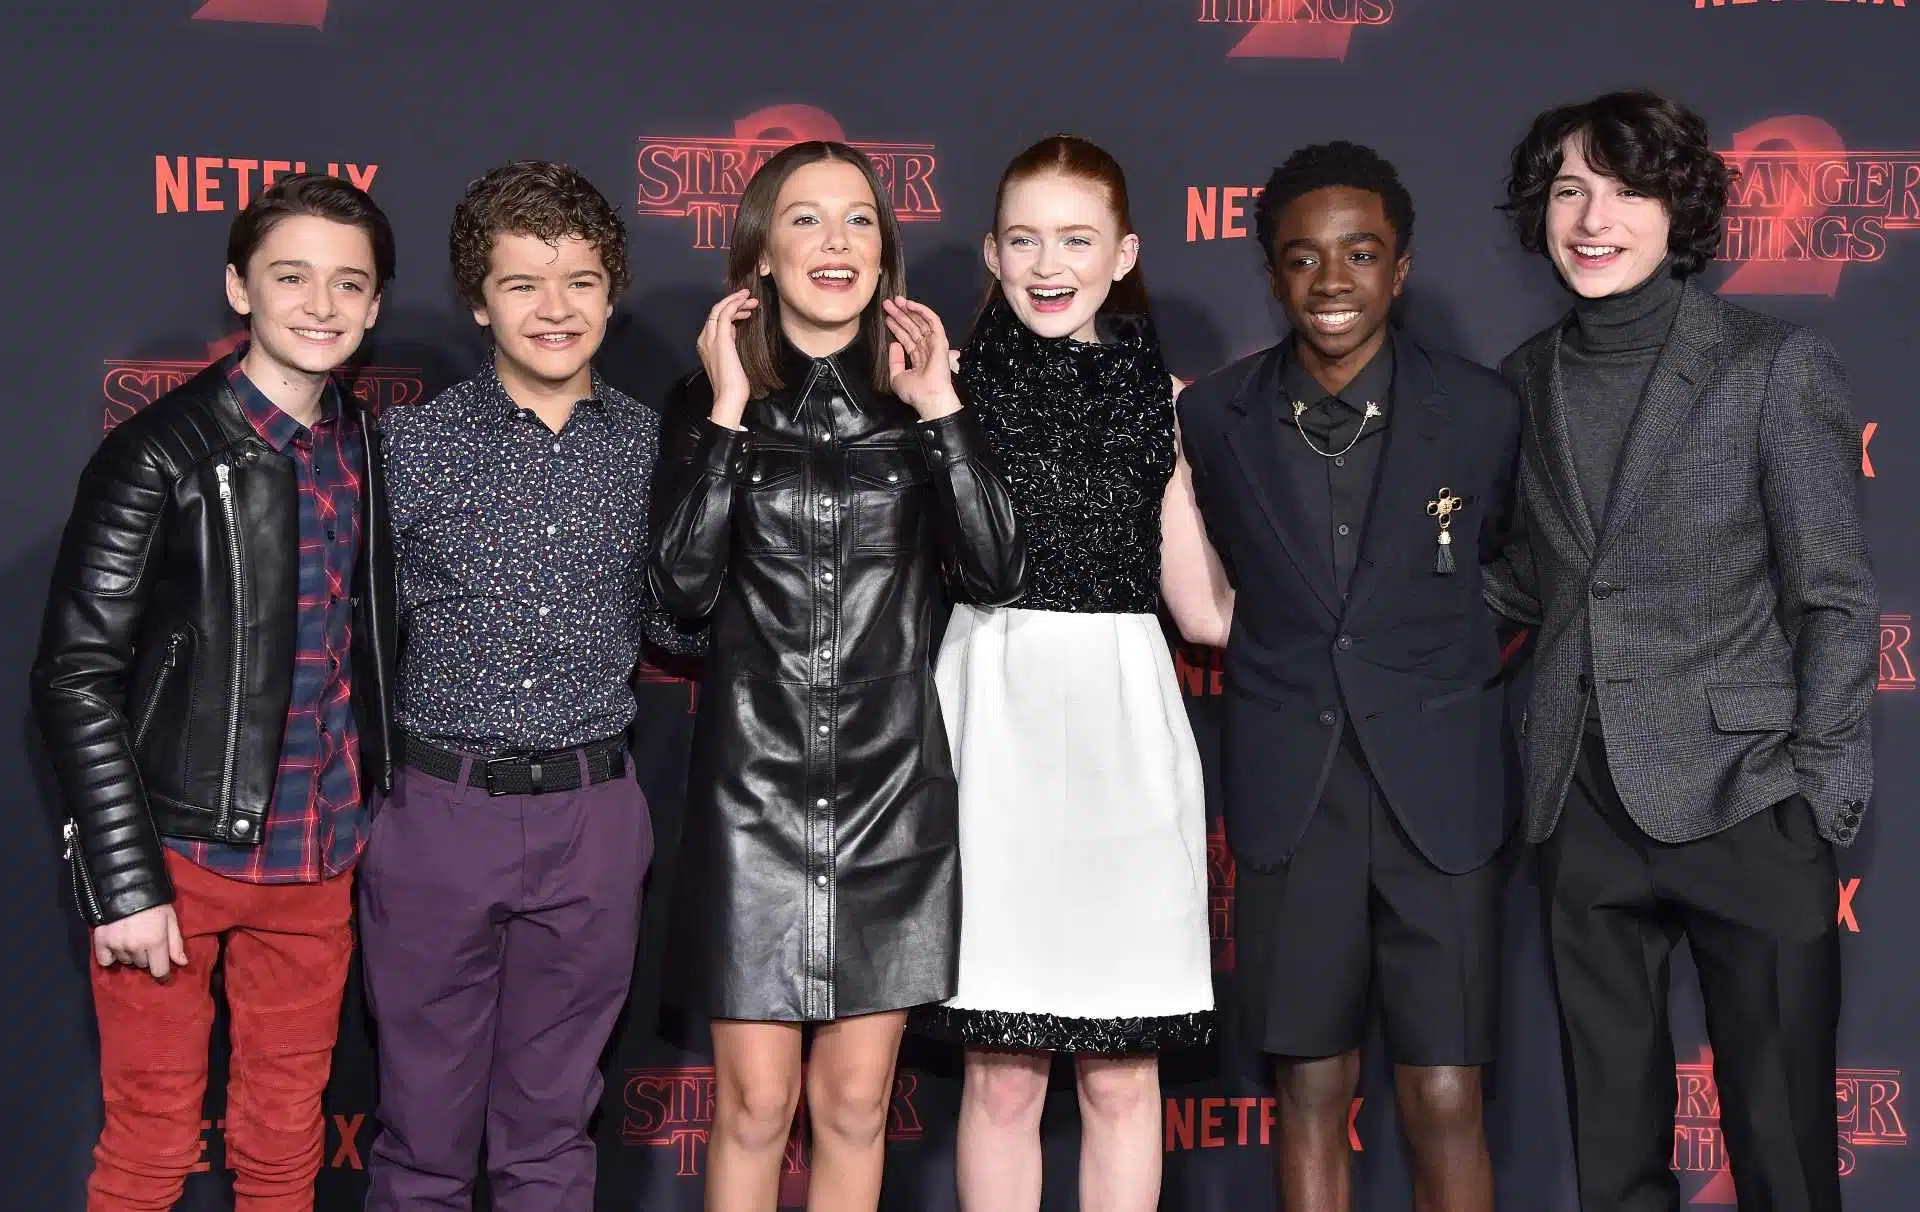 Stranger Things - Why The Netflix Show Is So Popular